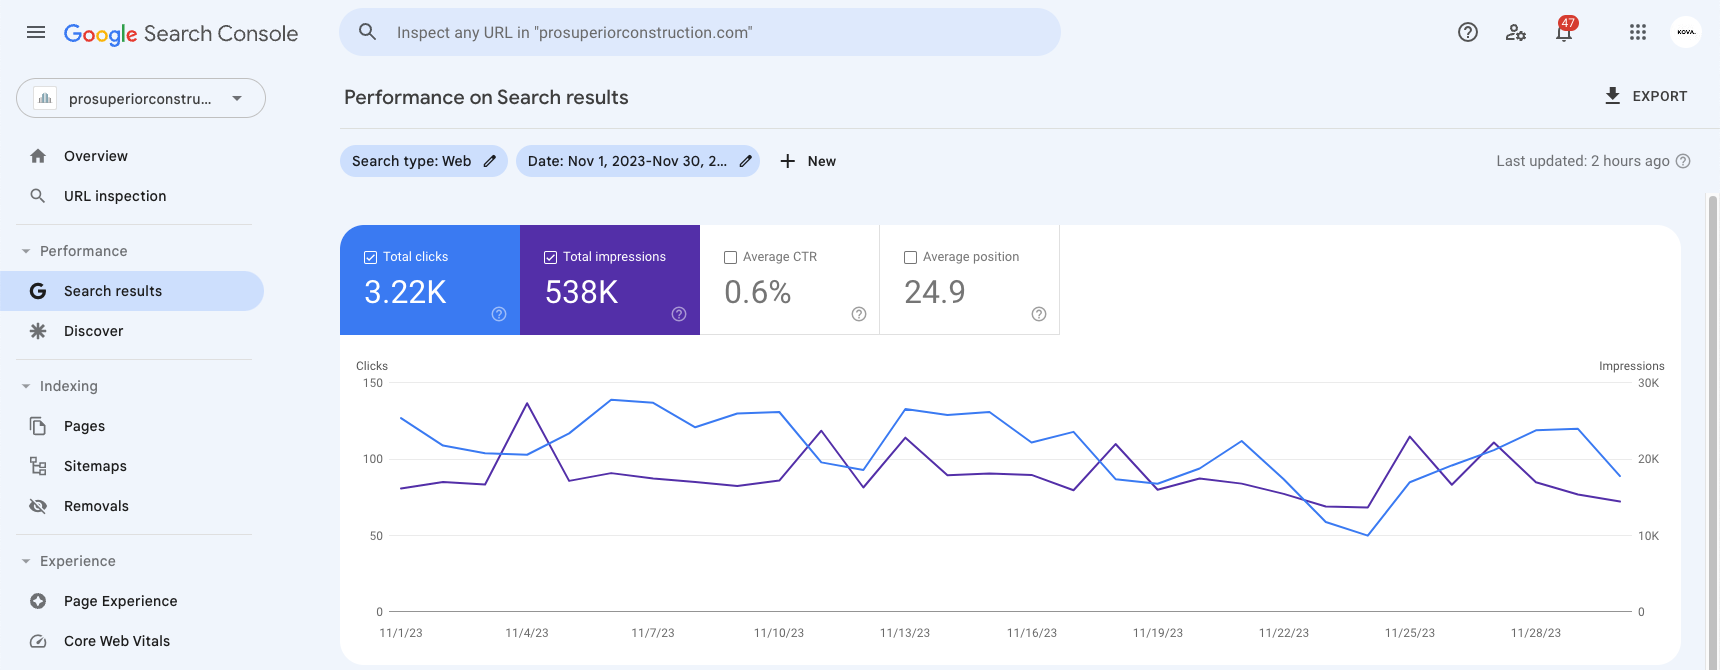 Google search console displaying siding companies traffic of 4,810 after SEO